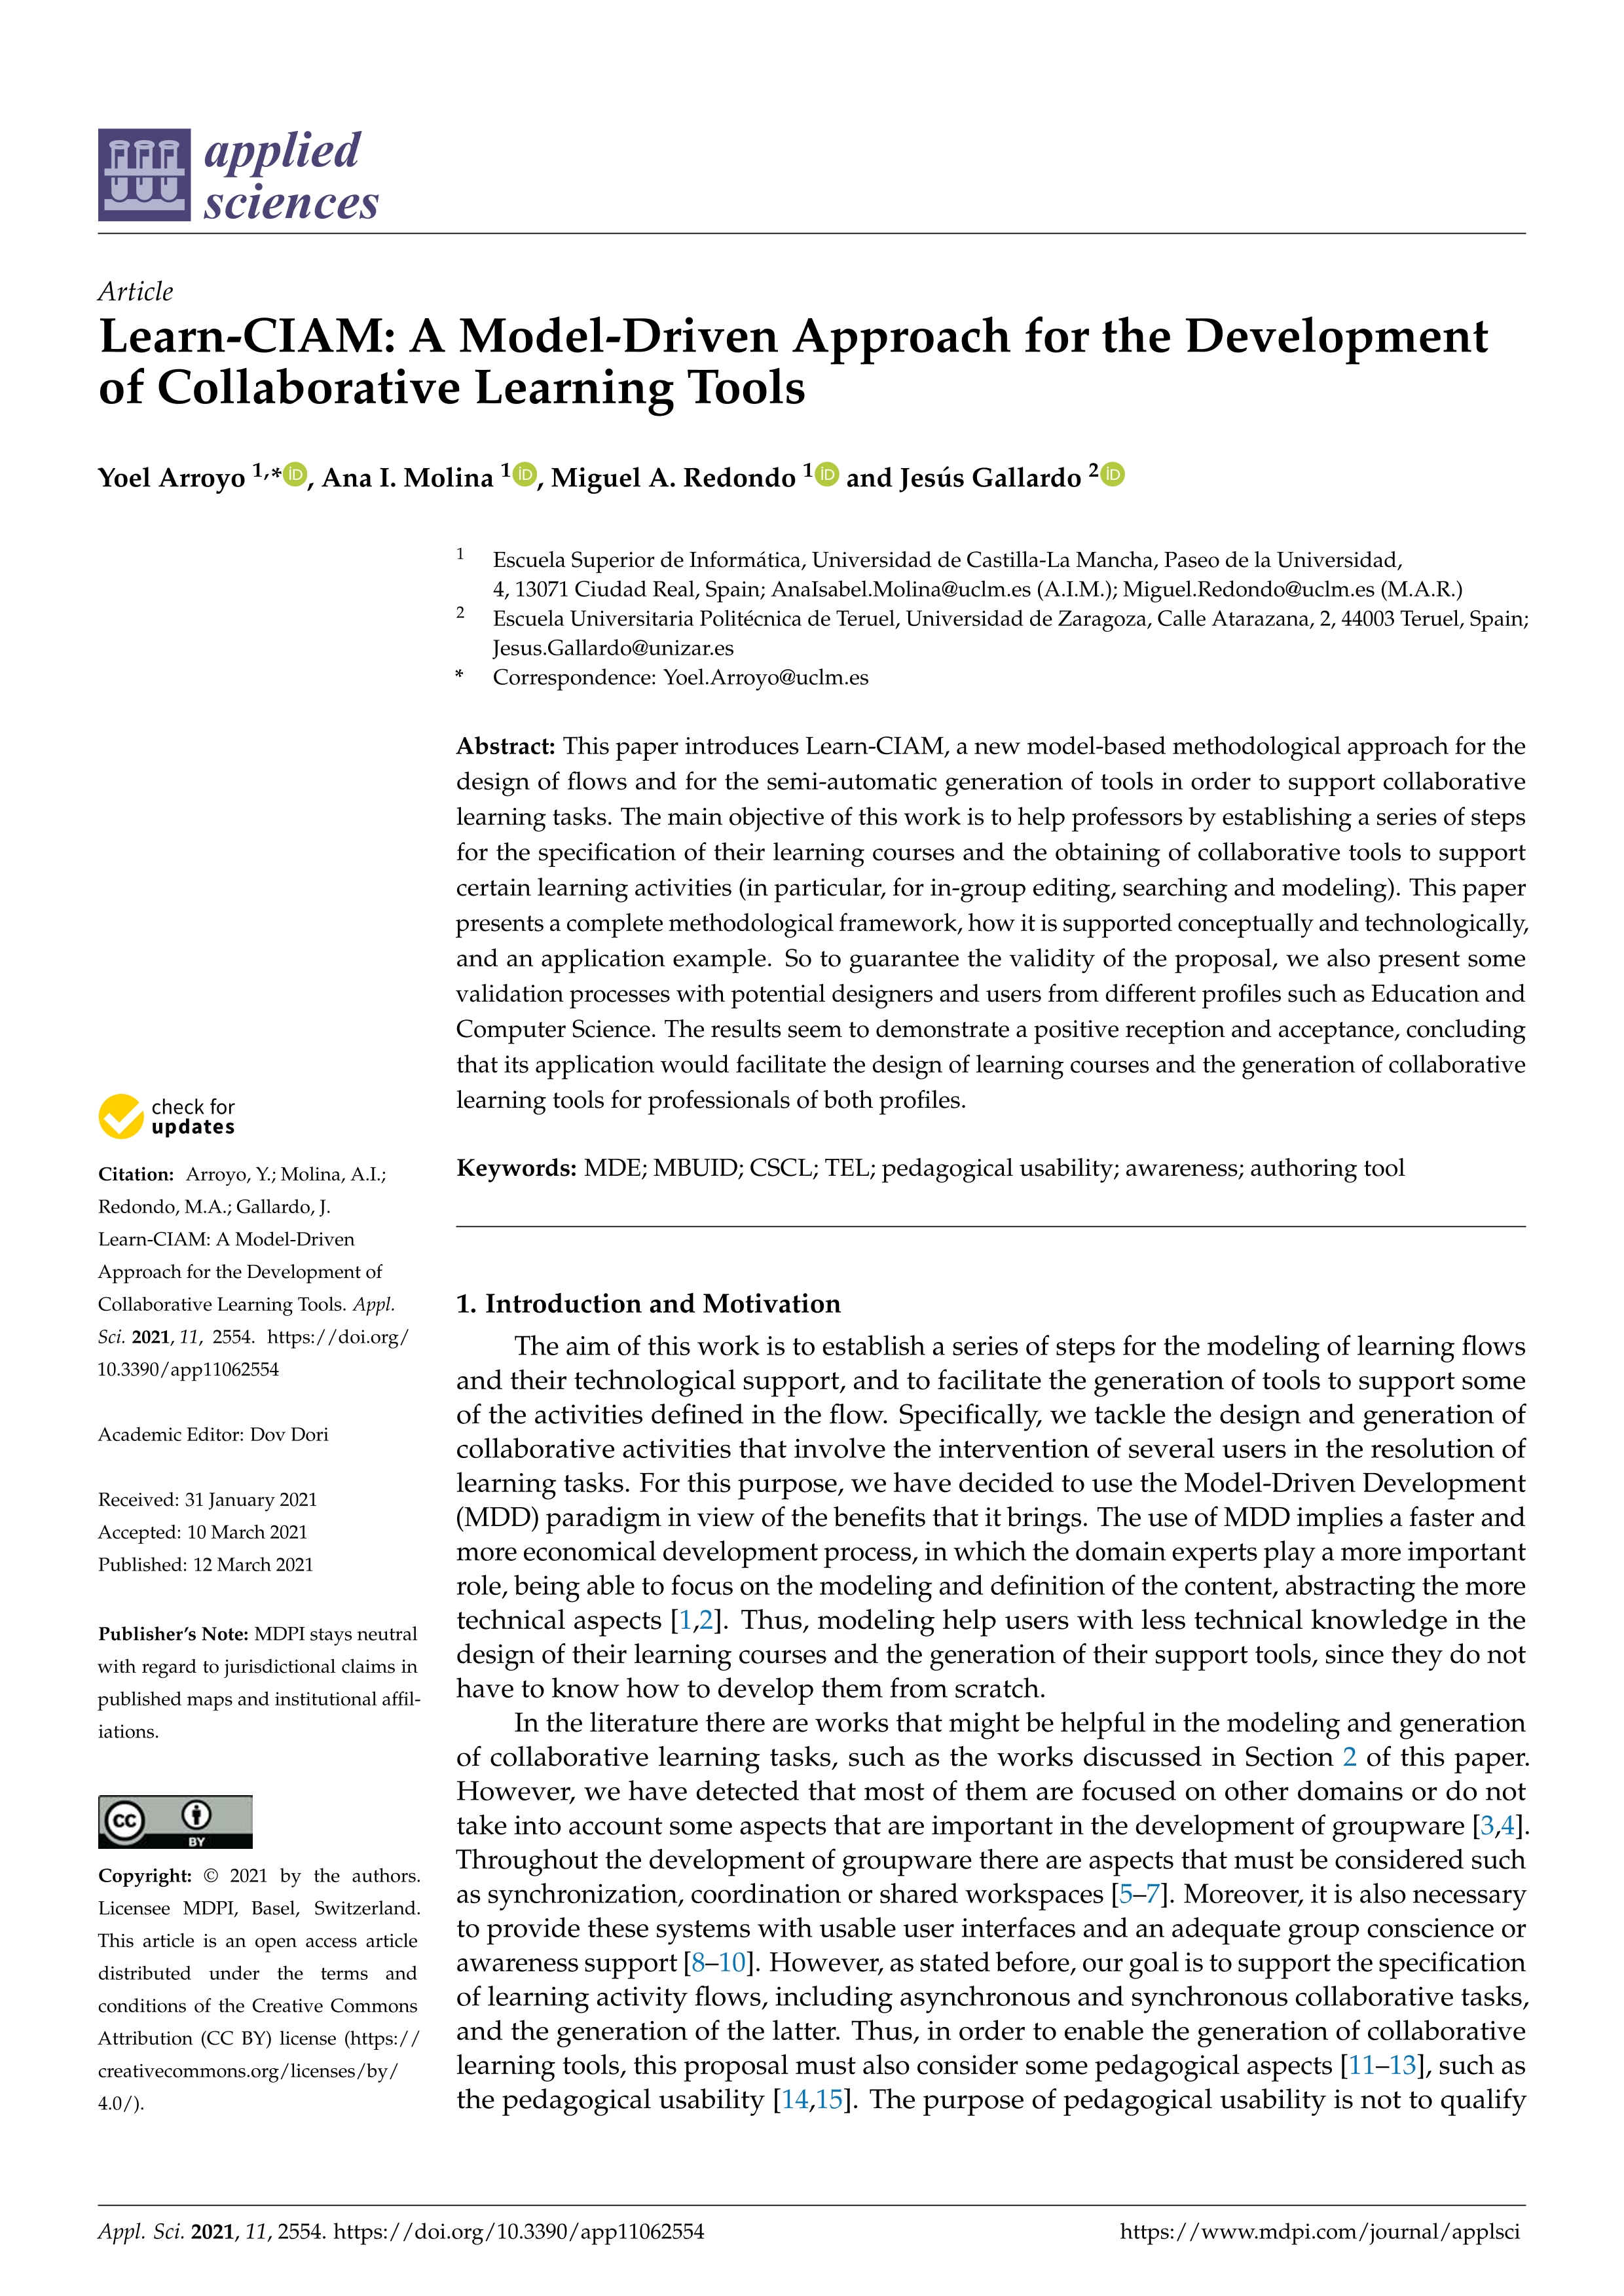 Learn-ciam: a model-driven approach for the development of collaborative learning tools